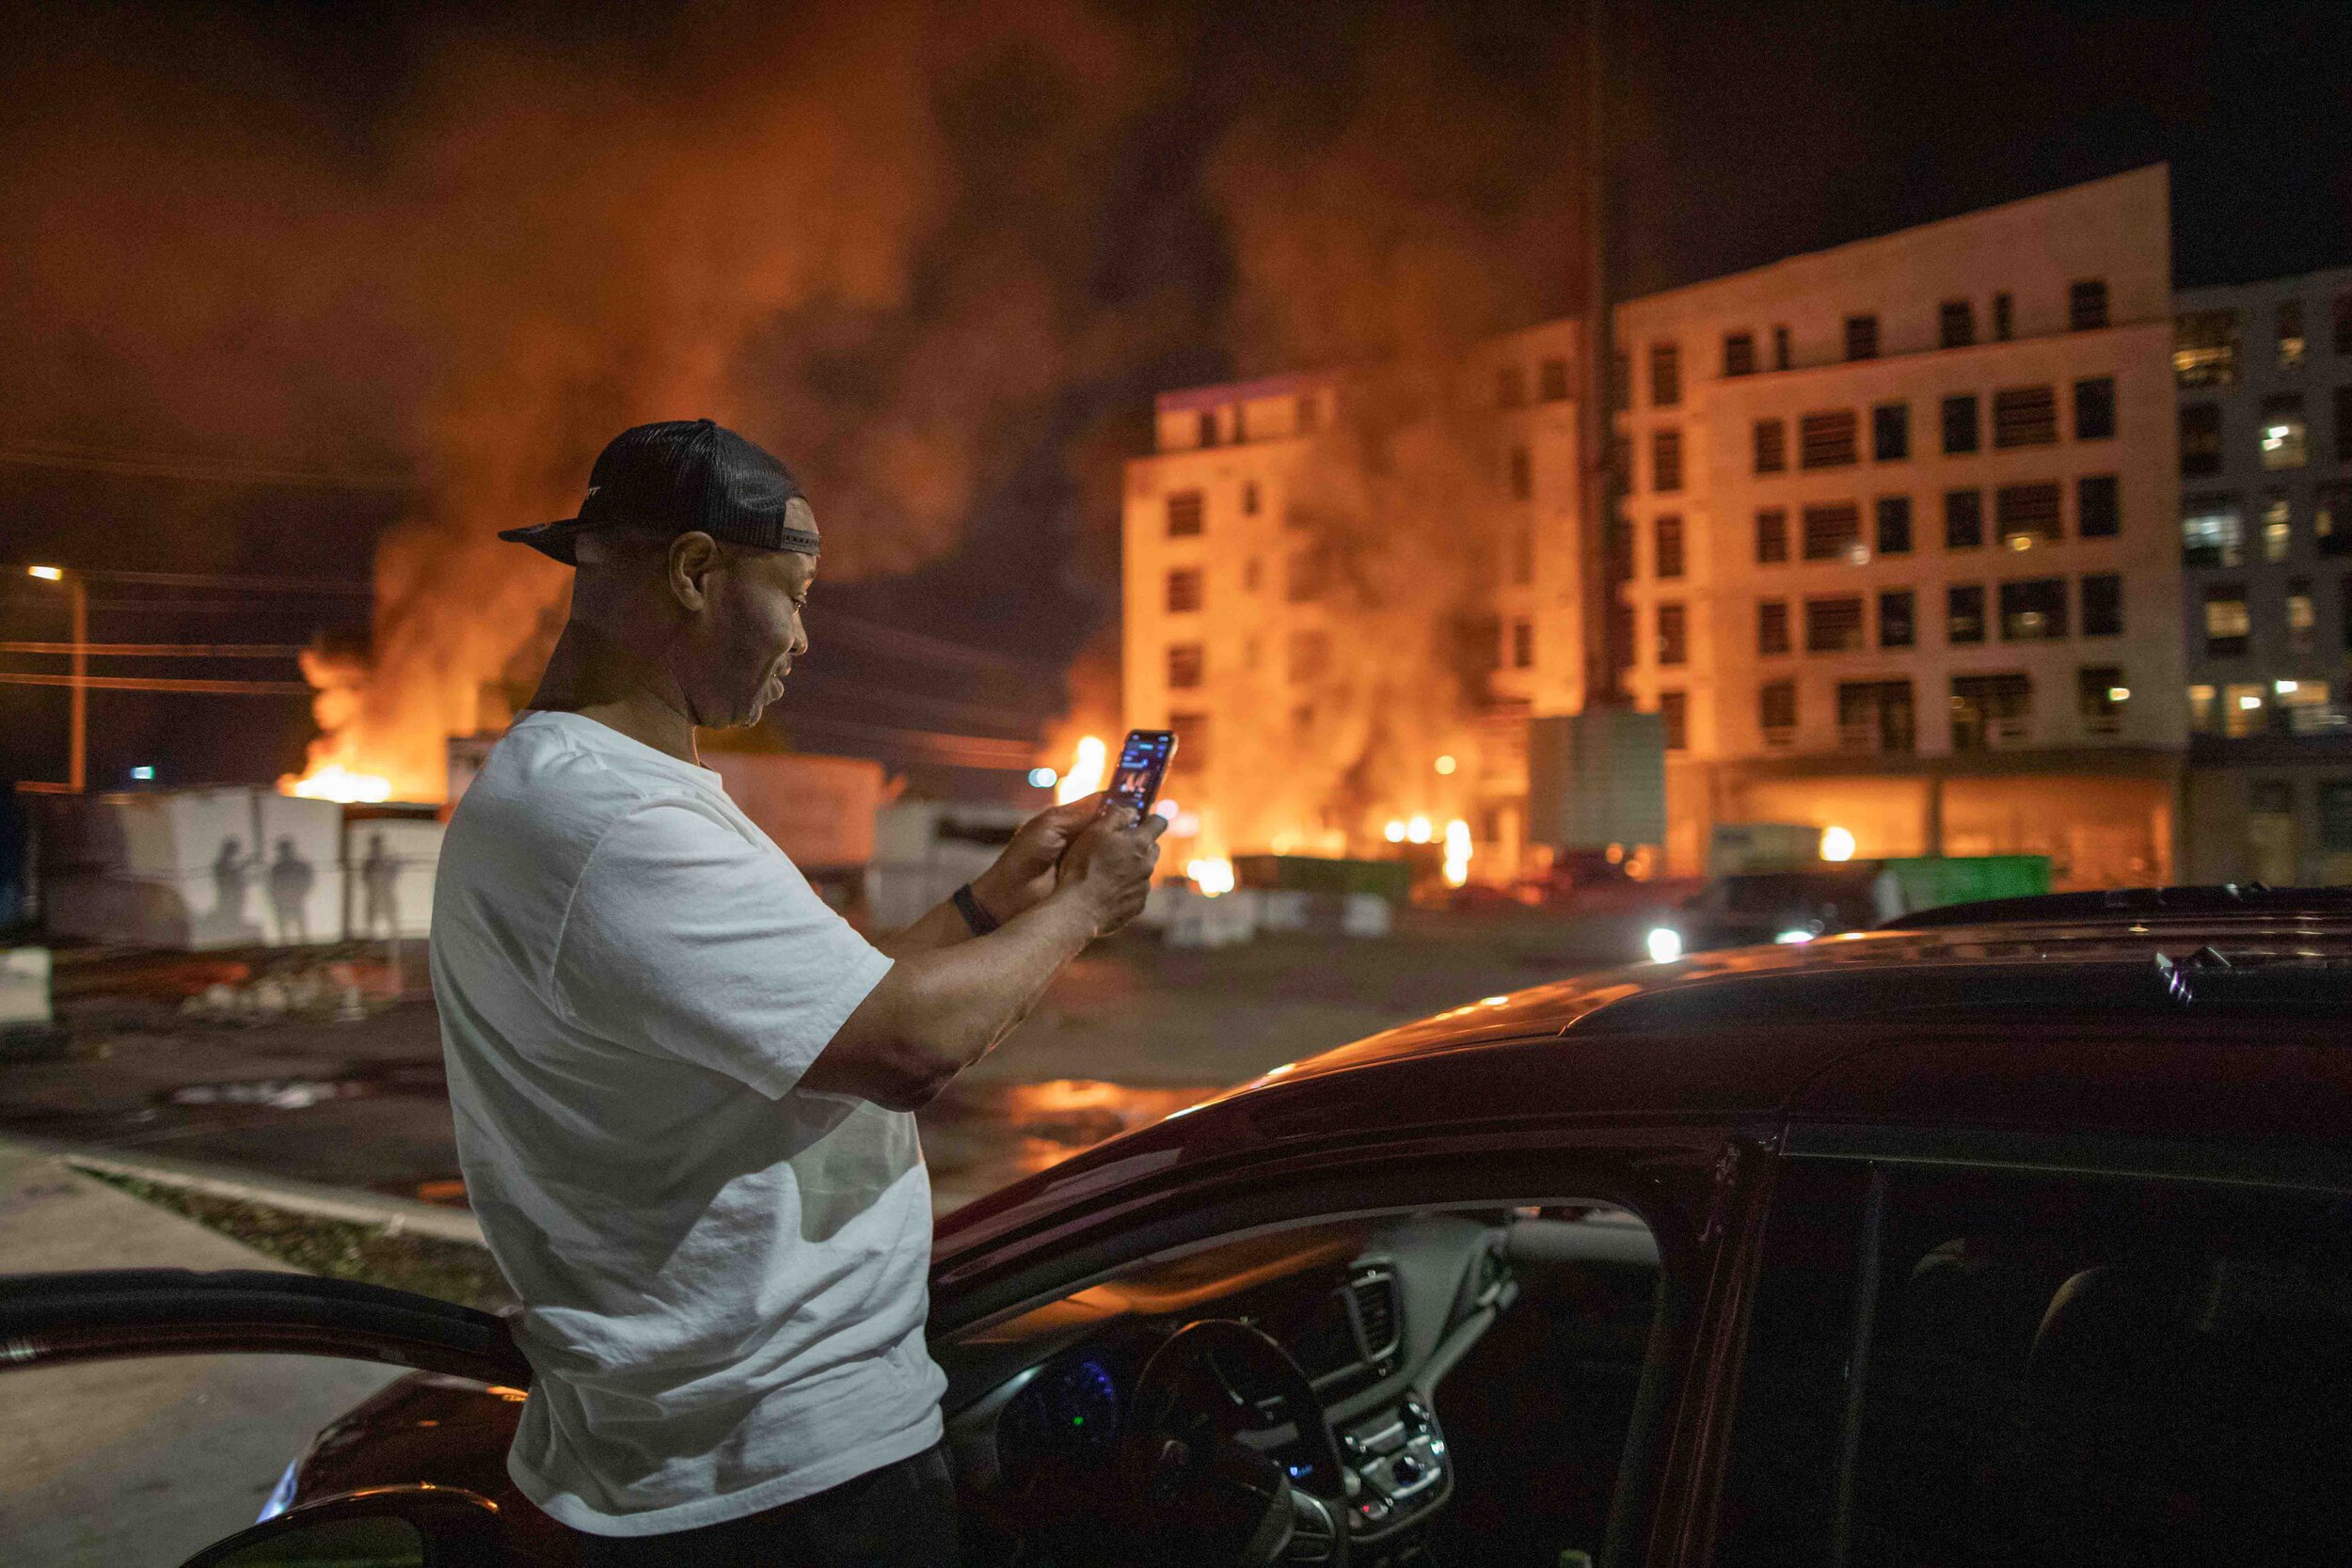  As a construction site burns in front of him, Jeff films what was happening from his vehicle after it was set on fire during a riot over the police killing of Geroge Floyd in Minneapolis, Minnesota on May 27. 